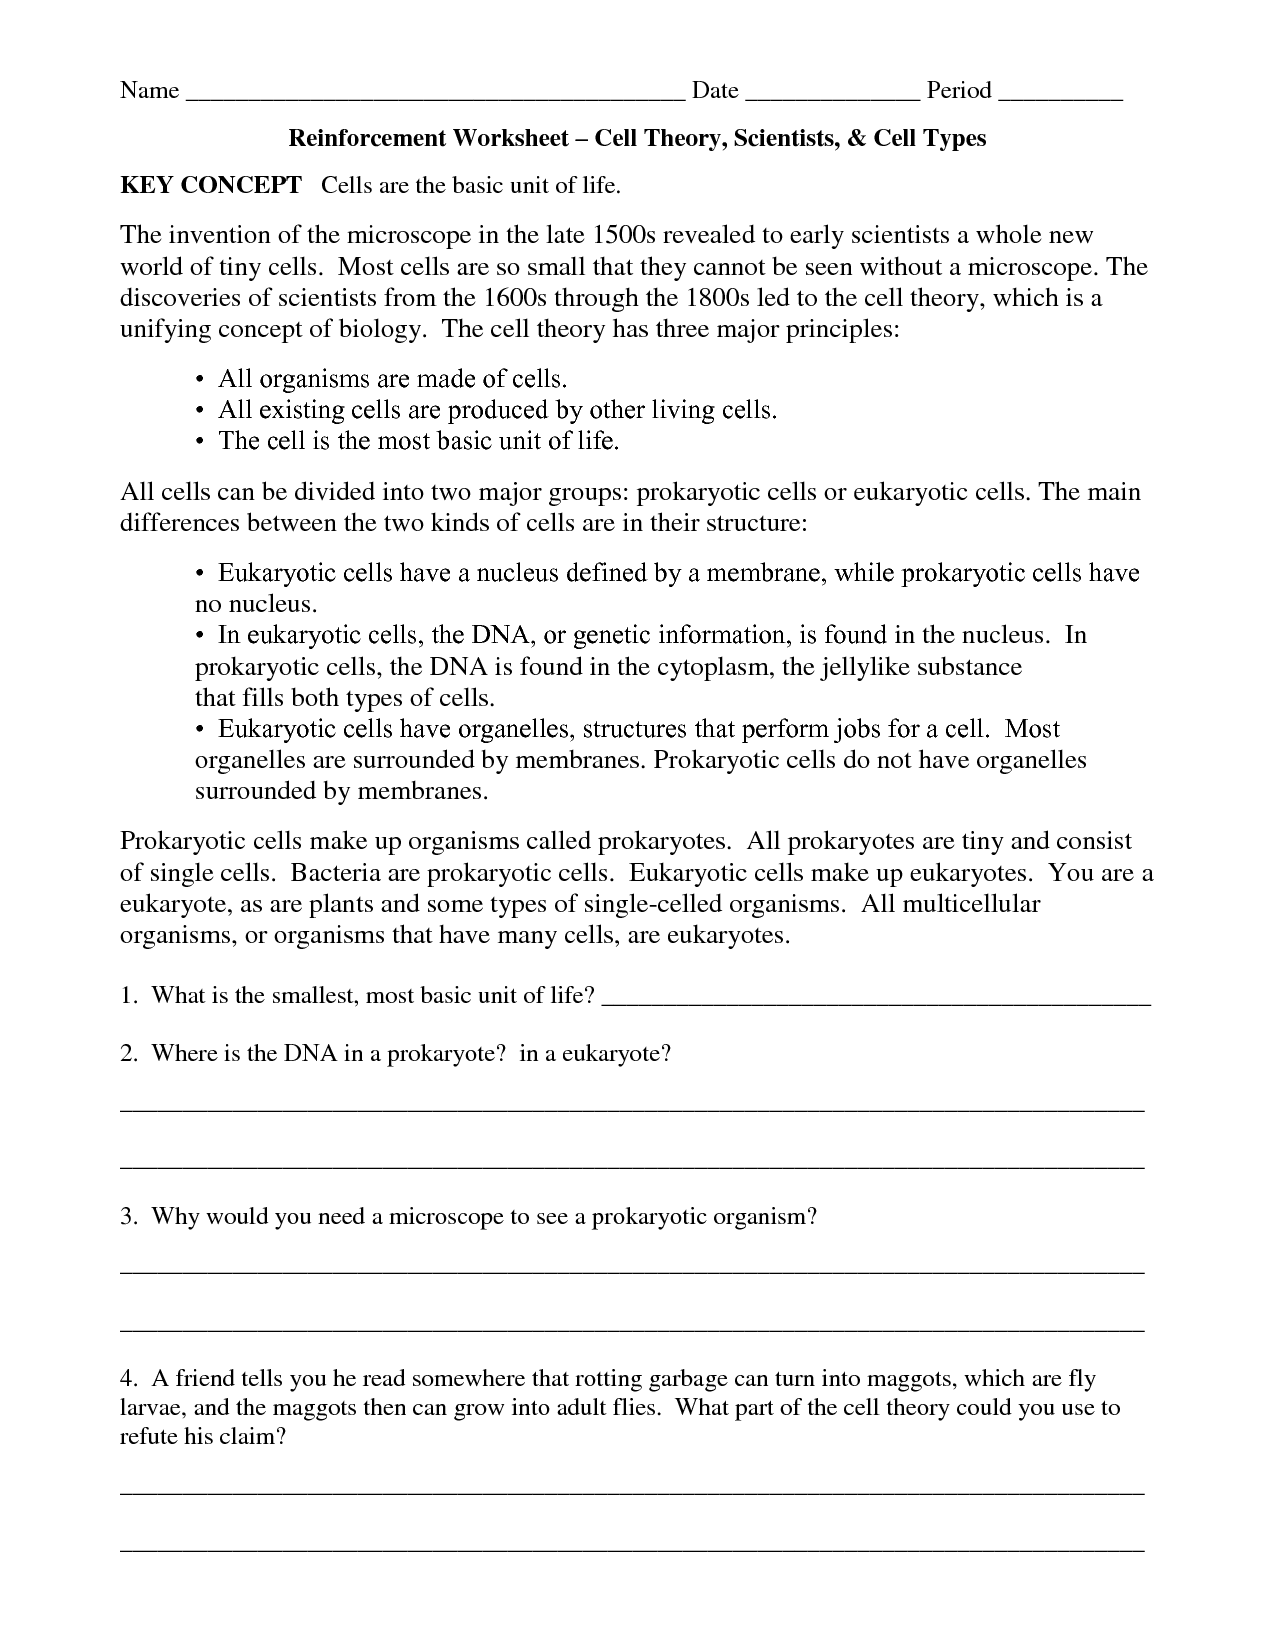 15 Best Images Of Cell Theory Worksheet Answers Prokaryotic And Eukaryotic Cells Worksheet 